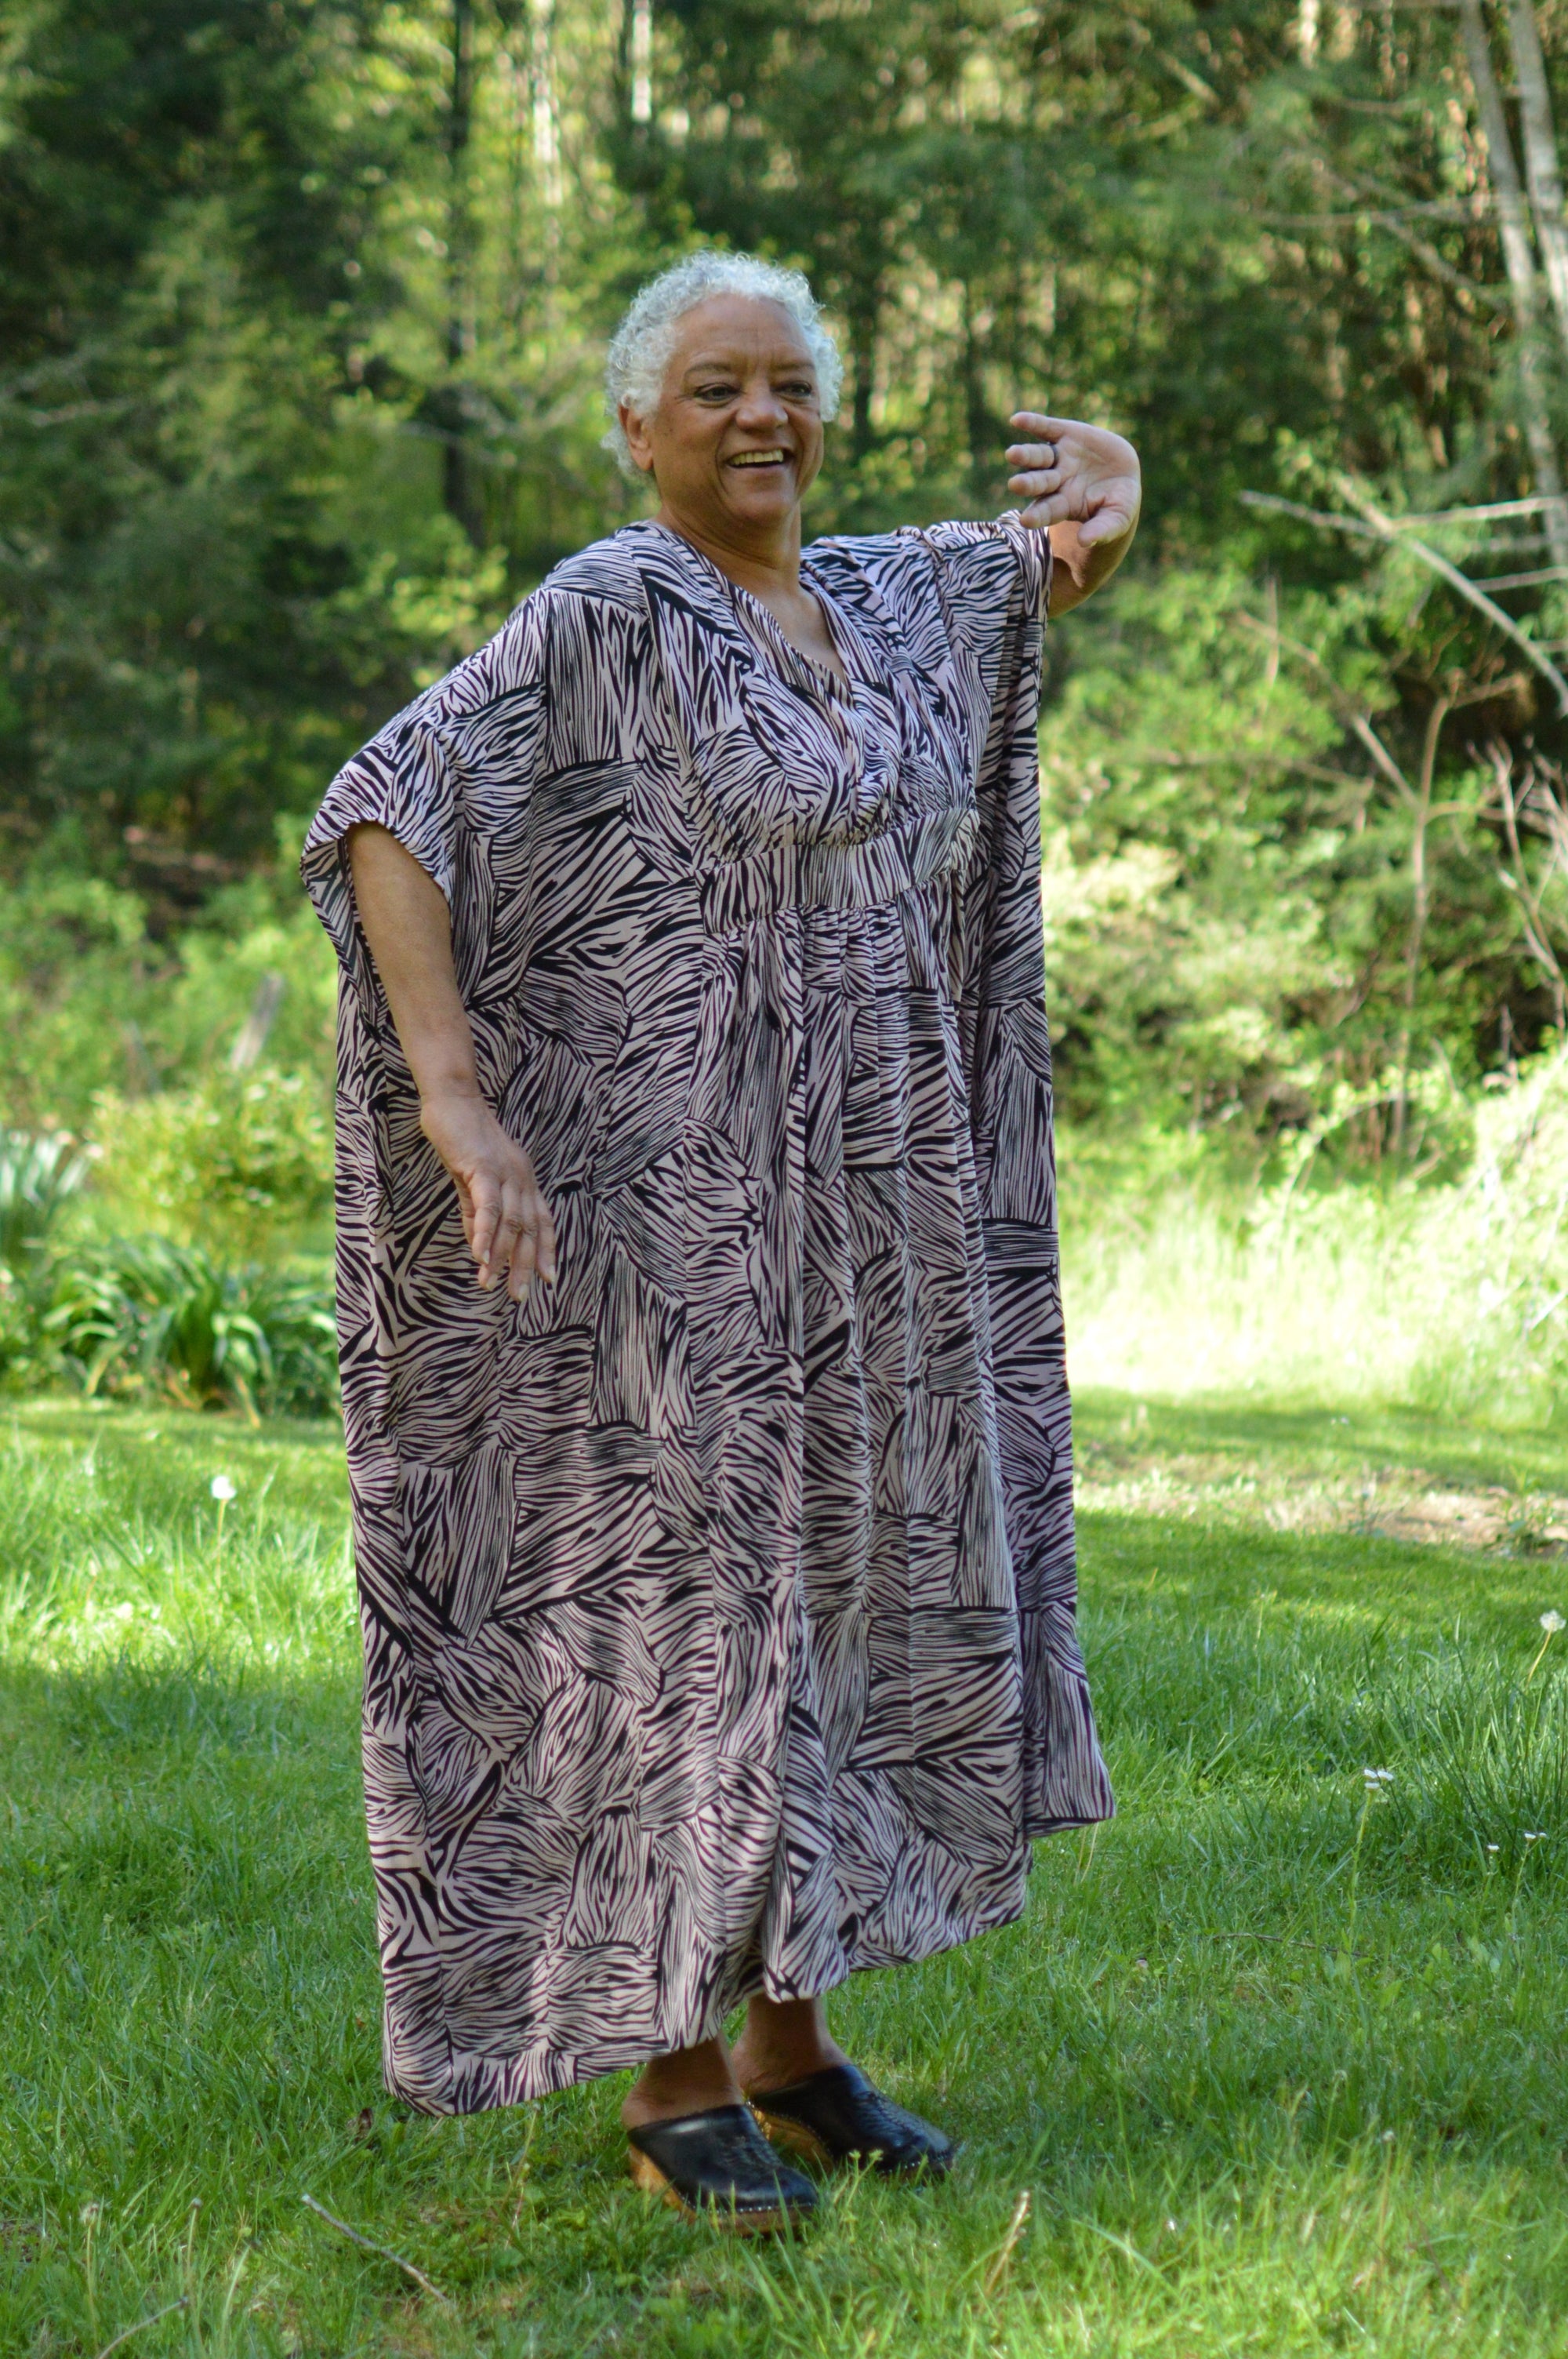 Dancing older African American woman wearing Kaftan in a black and pink stripe like print with greenery in the background.